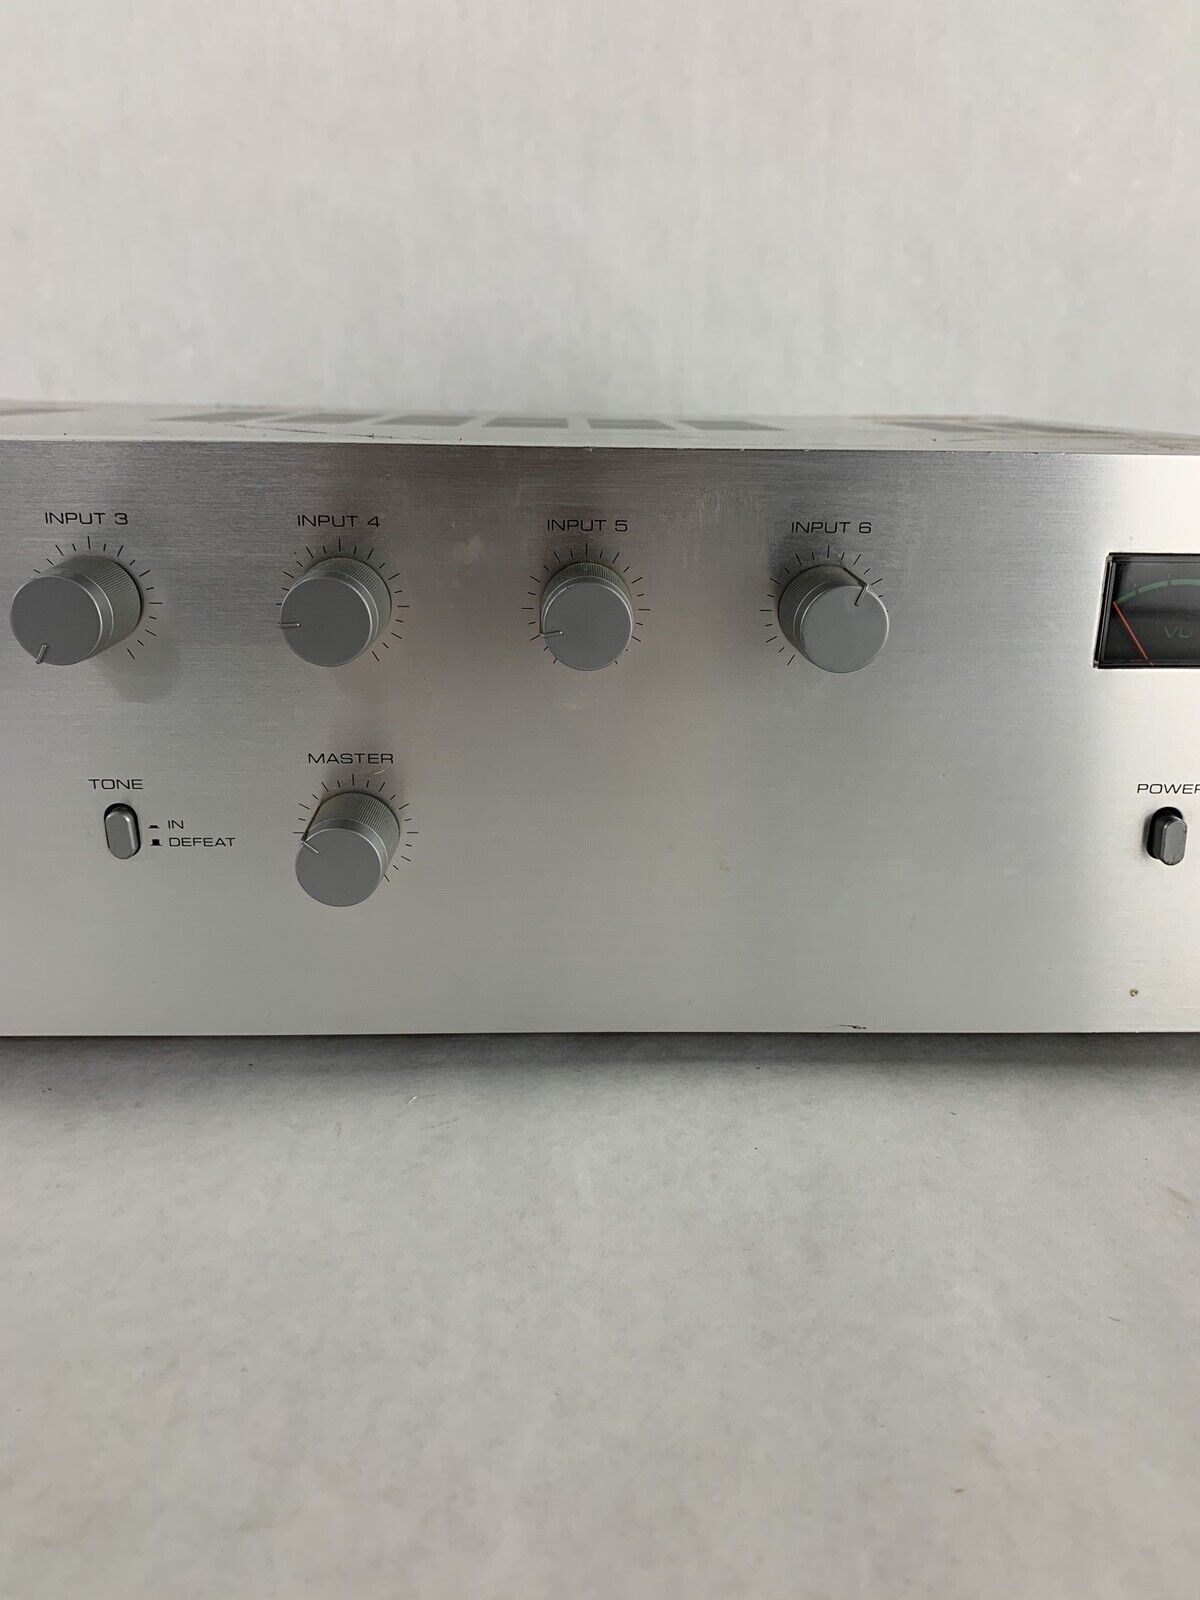 TOA A-912A 900 Series Mixer/Amplifier Missing Modular Cards Tested